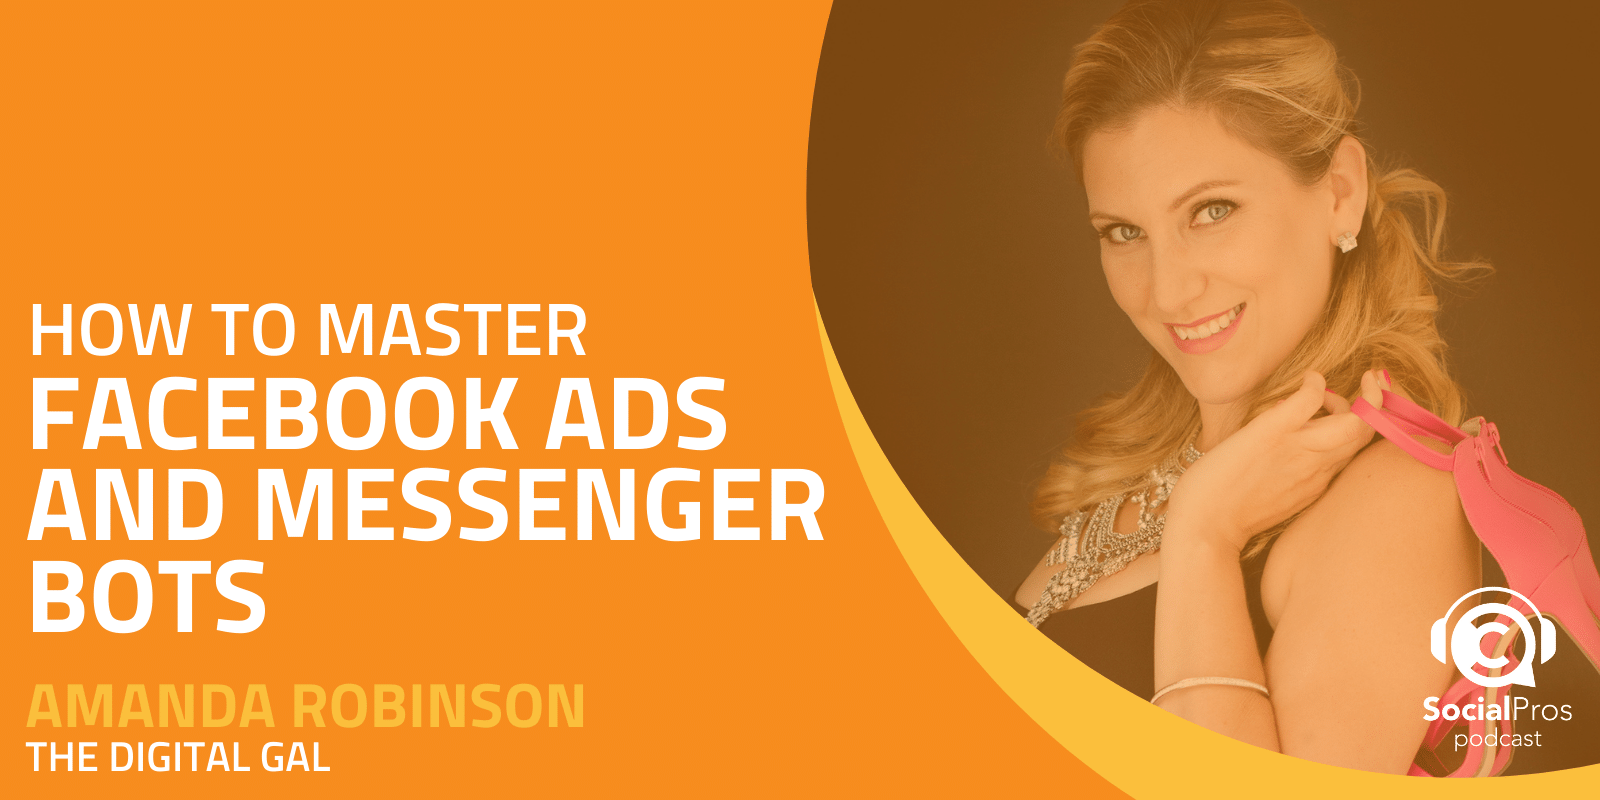 How to Master Facebook Ads and Messenger Bots